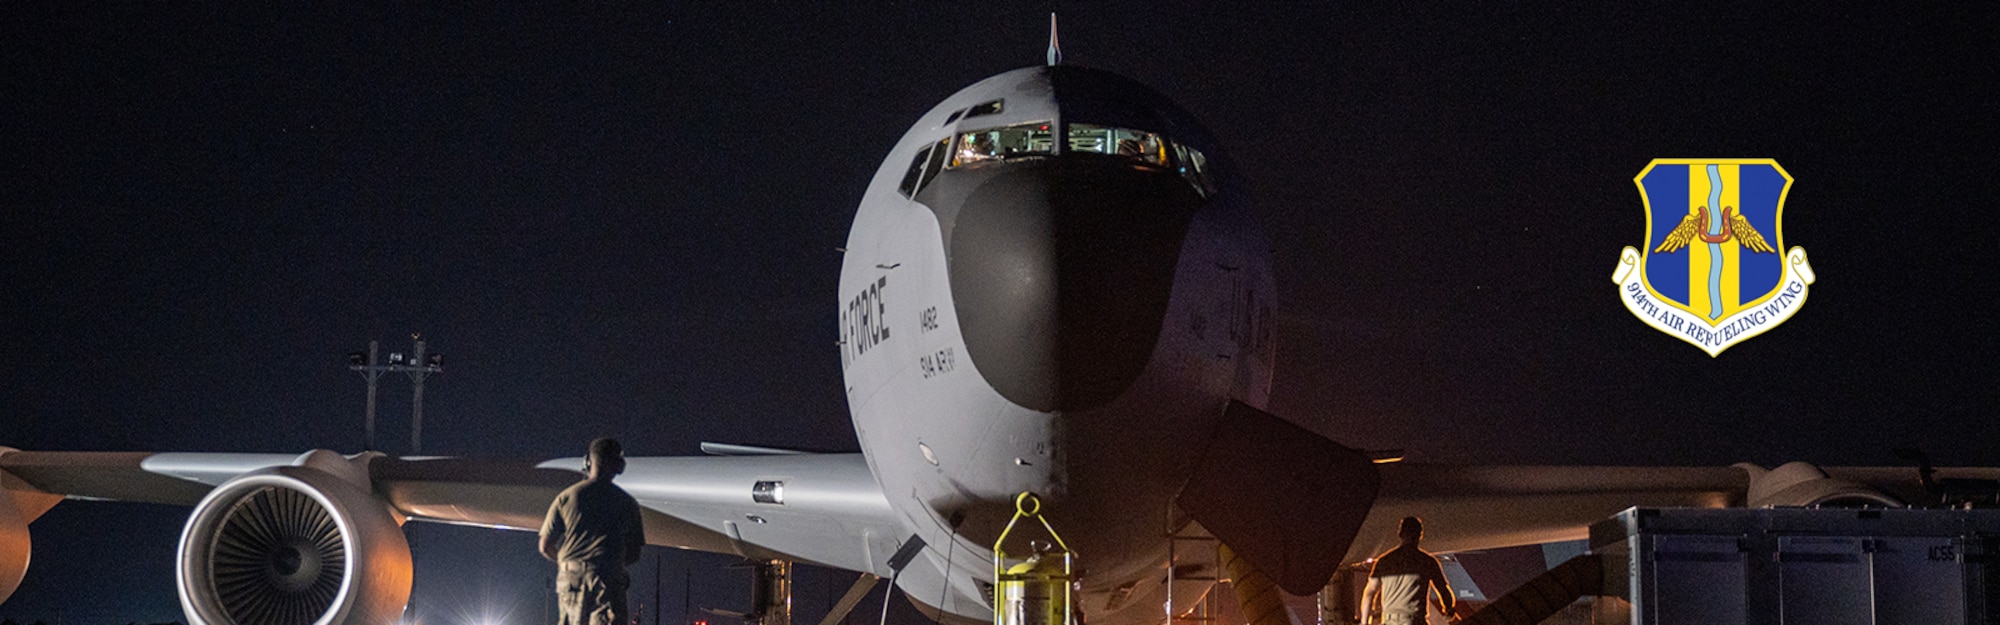 U.S. Air Force Airmen with the 914th Air Refueling Wing, NY, prepare a KC-135 Stratotanker for takeoff August 29, 2022 on the flightline at  Kadena Air Base, Japan.  The Stratotanker and crew were on a temporary deployment to support the Pacific Air Forces with refueling capabilities. (U.S. Air Force photo by Staff Sgt. Tiffany A. Emery)